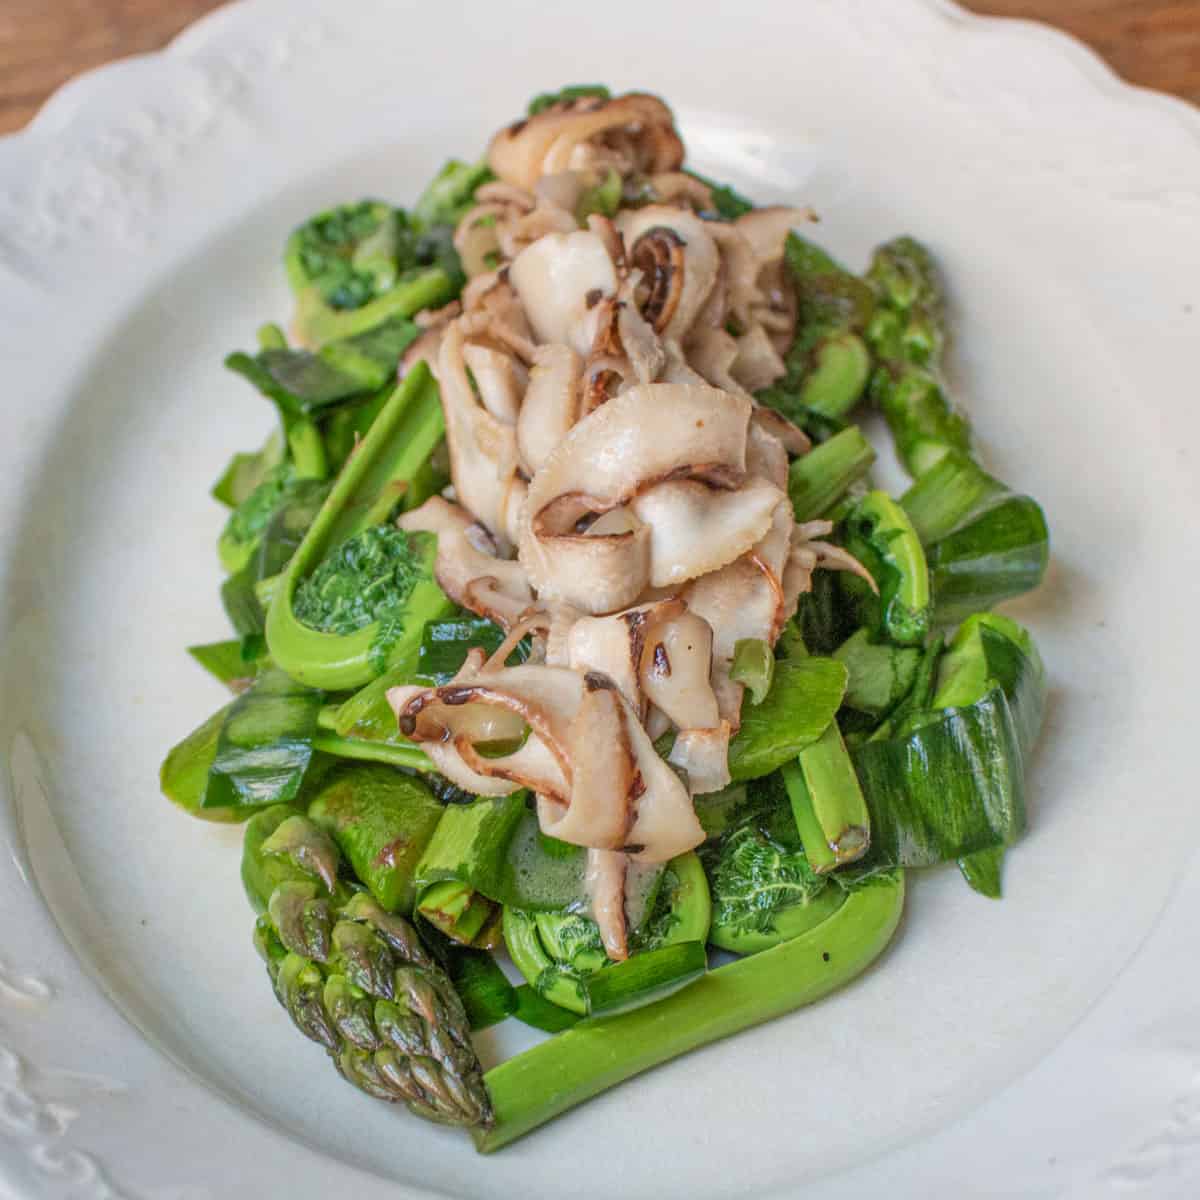 Asparagus and fiddleheads with shaved dryad saddle mushrooms recipe